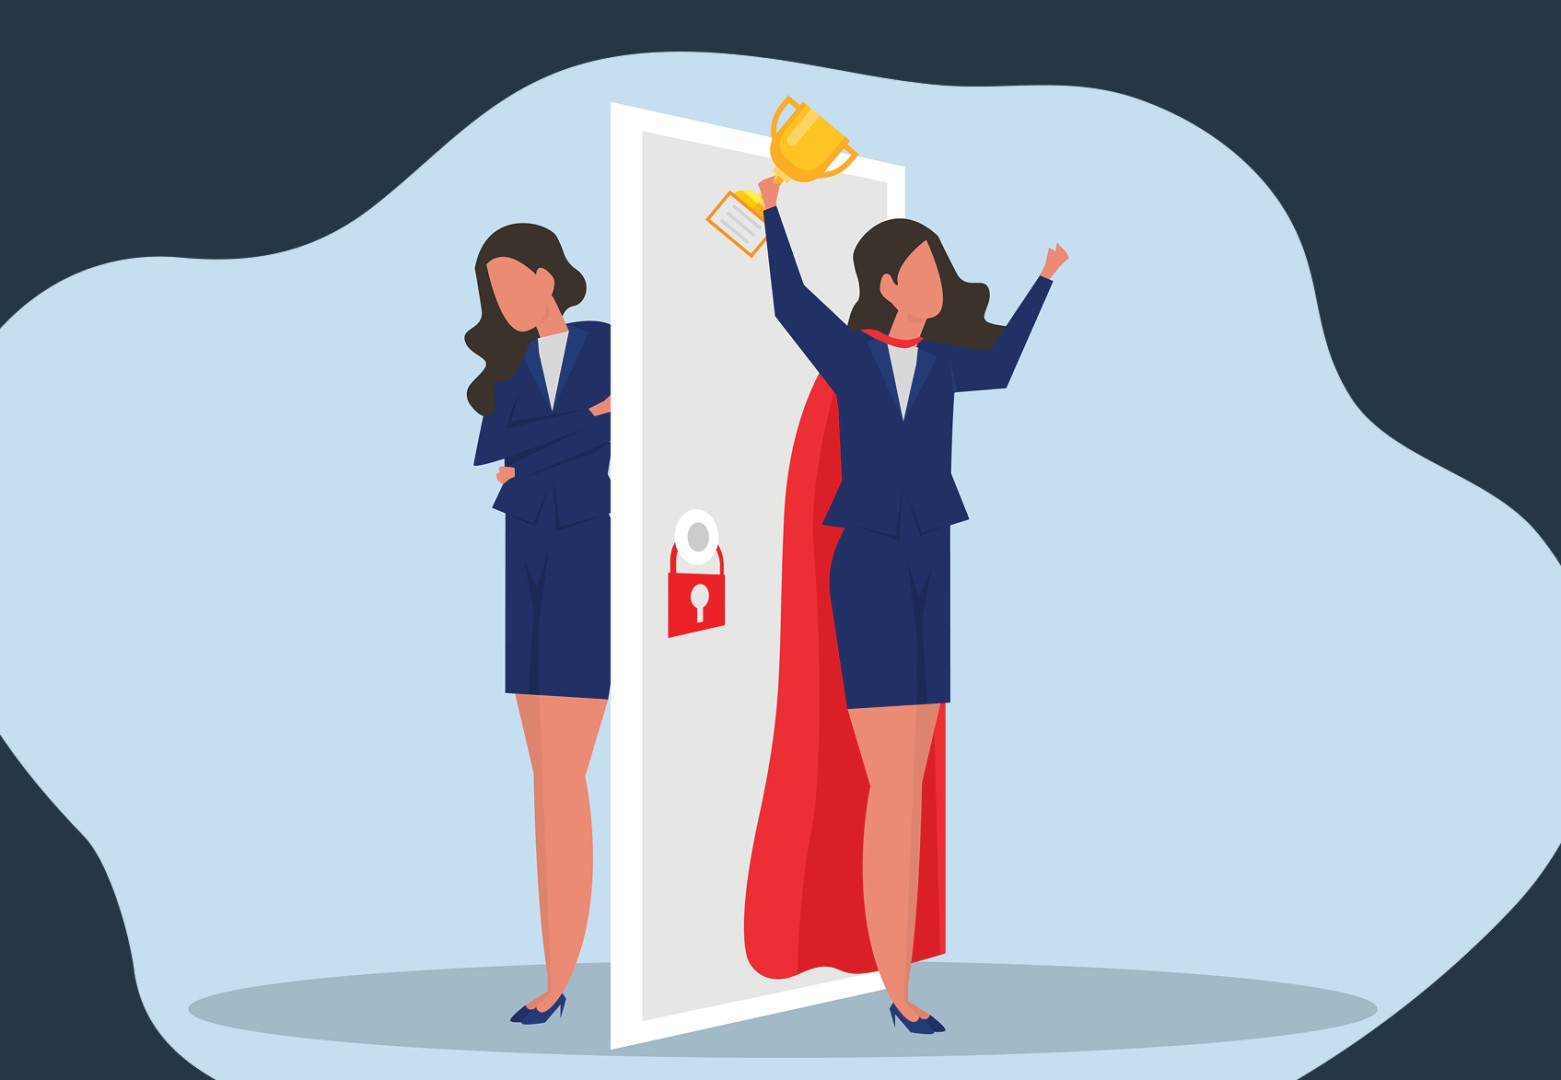 Woman hiding behind safety of a door while other version of same woman is in front of door wearing a cape and holding a trophy.